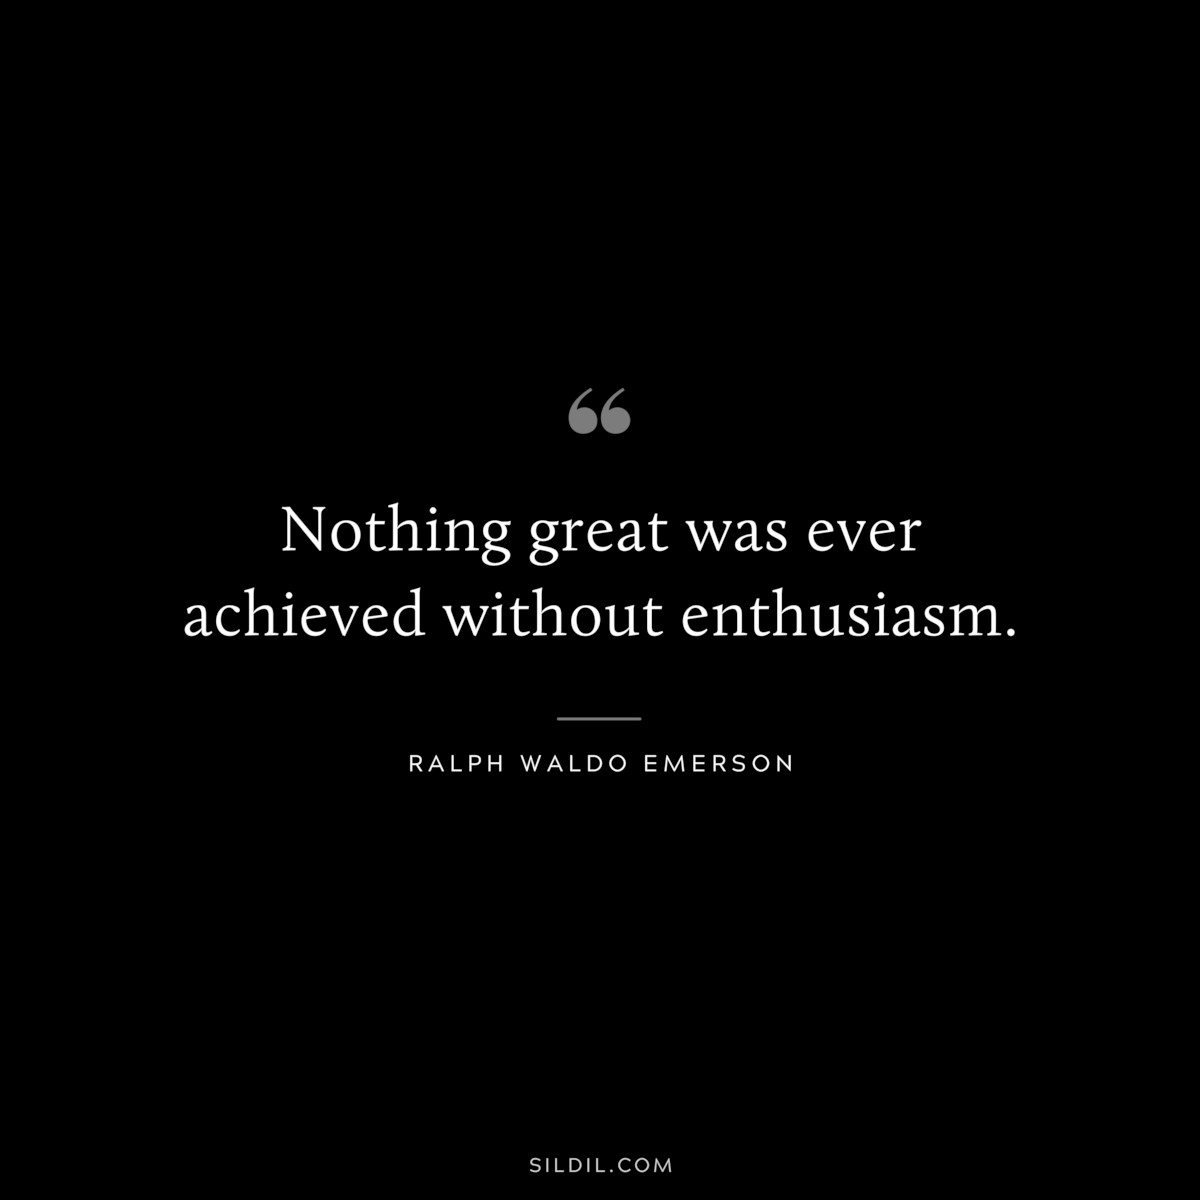 Nothing great was ever achieved without enthusiasm. — Ralph Waldo Emerson